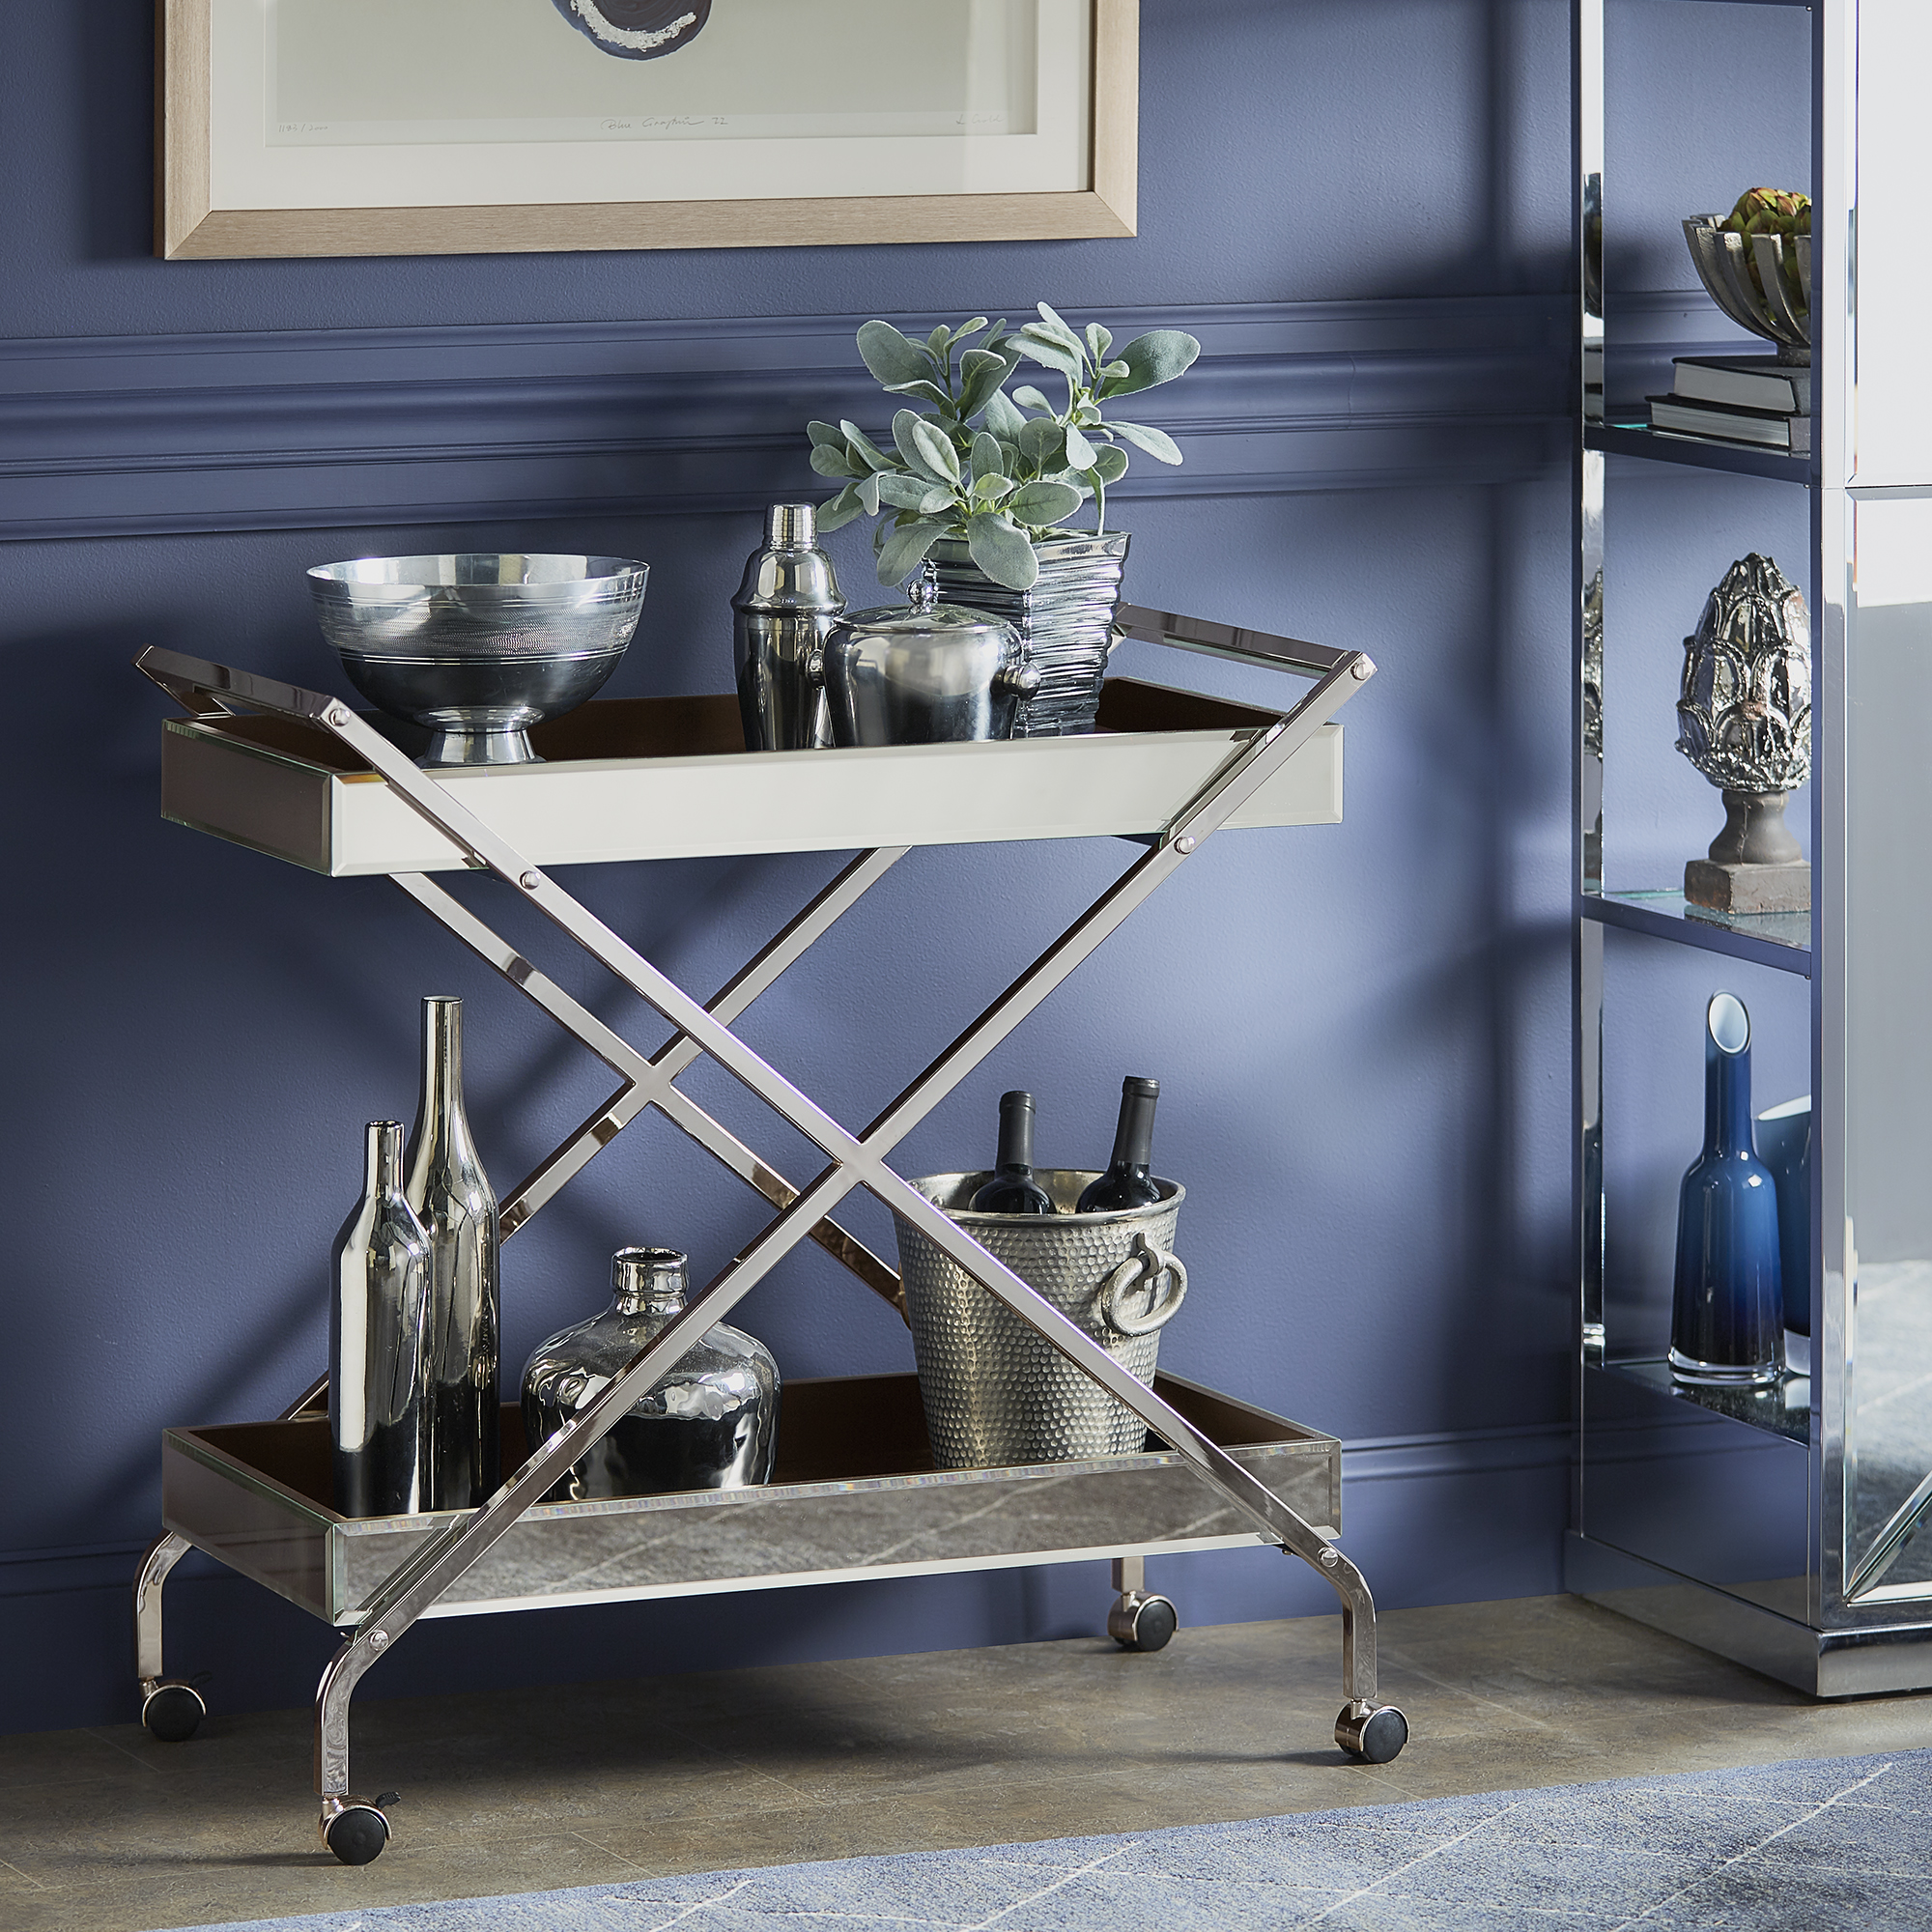 This first image used to depict how to style a bar cart features a glam-inspired bar cart. The bar cart has shiny chrome finishes and is decorated with chrome and silver barware. A potted plant on the top shelf adds a pop of color.